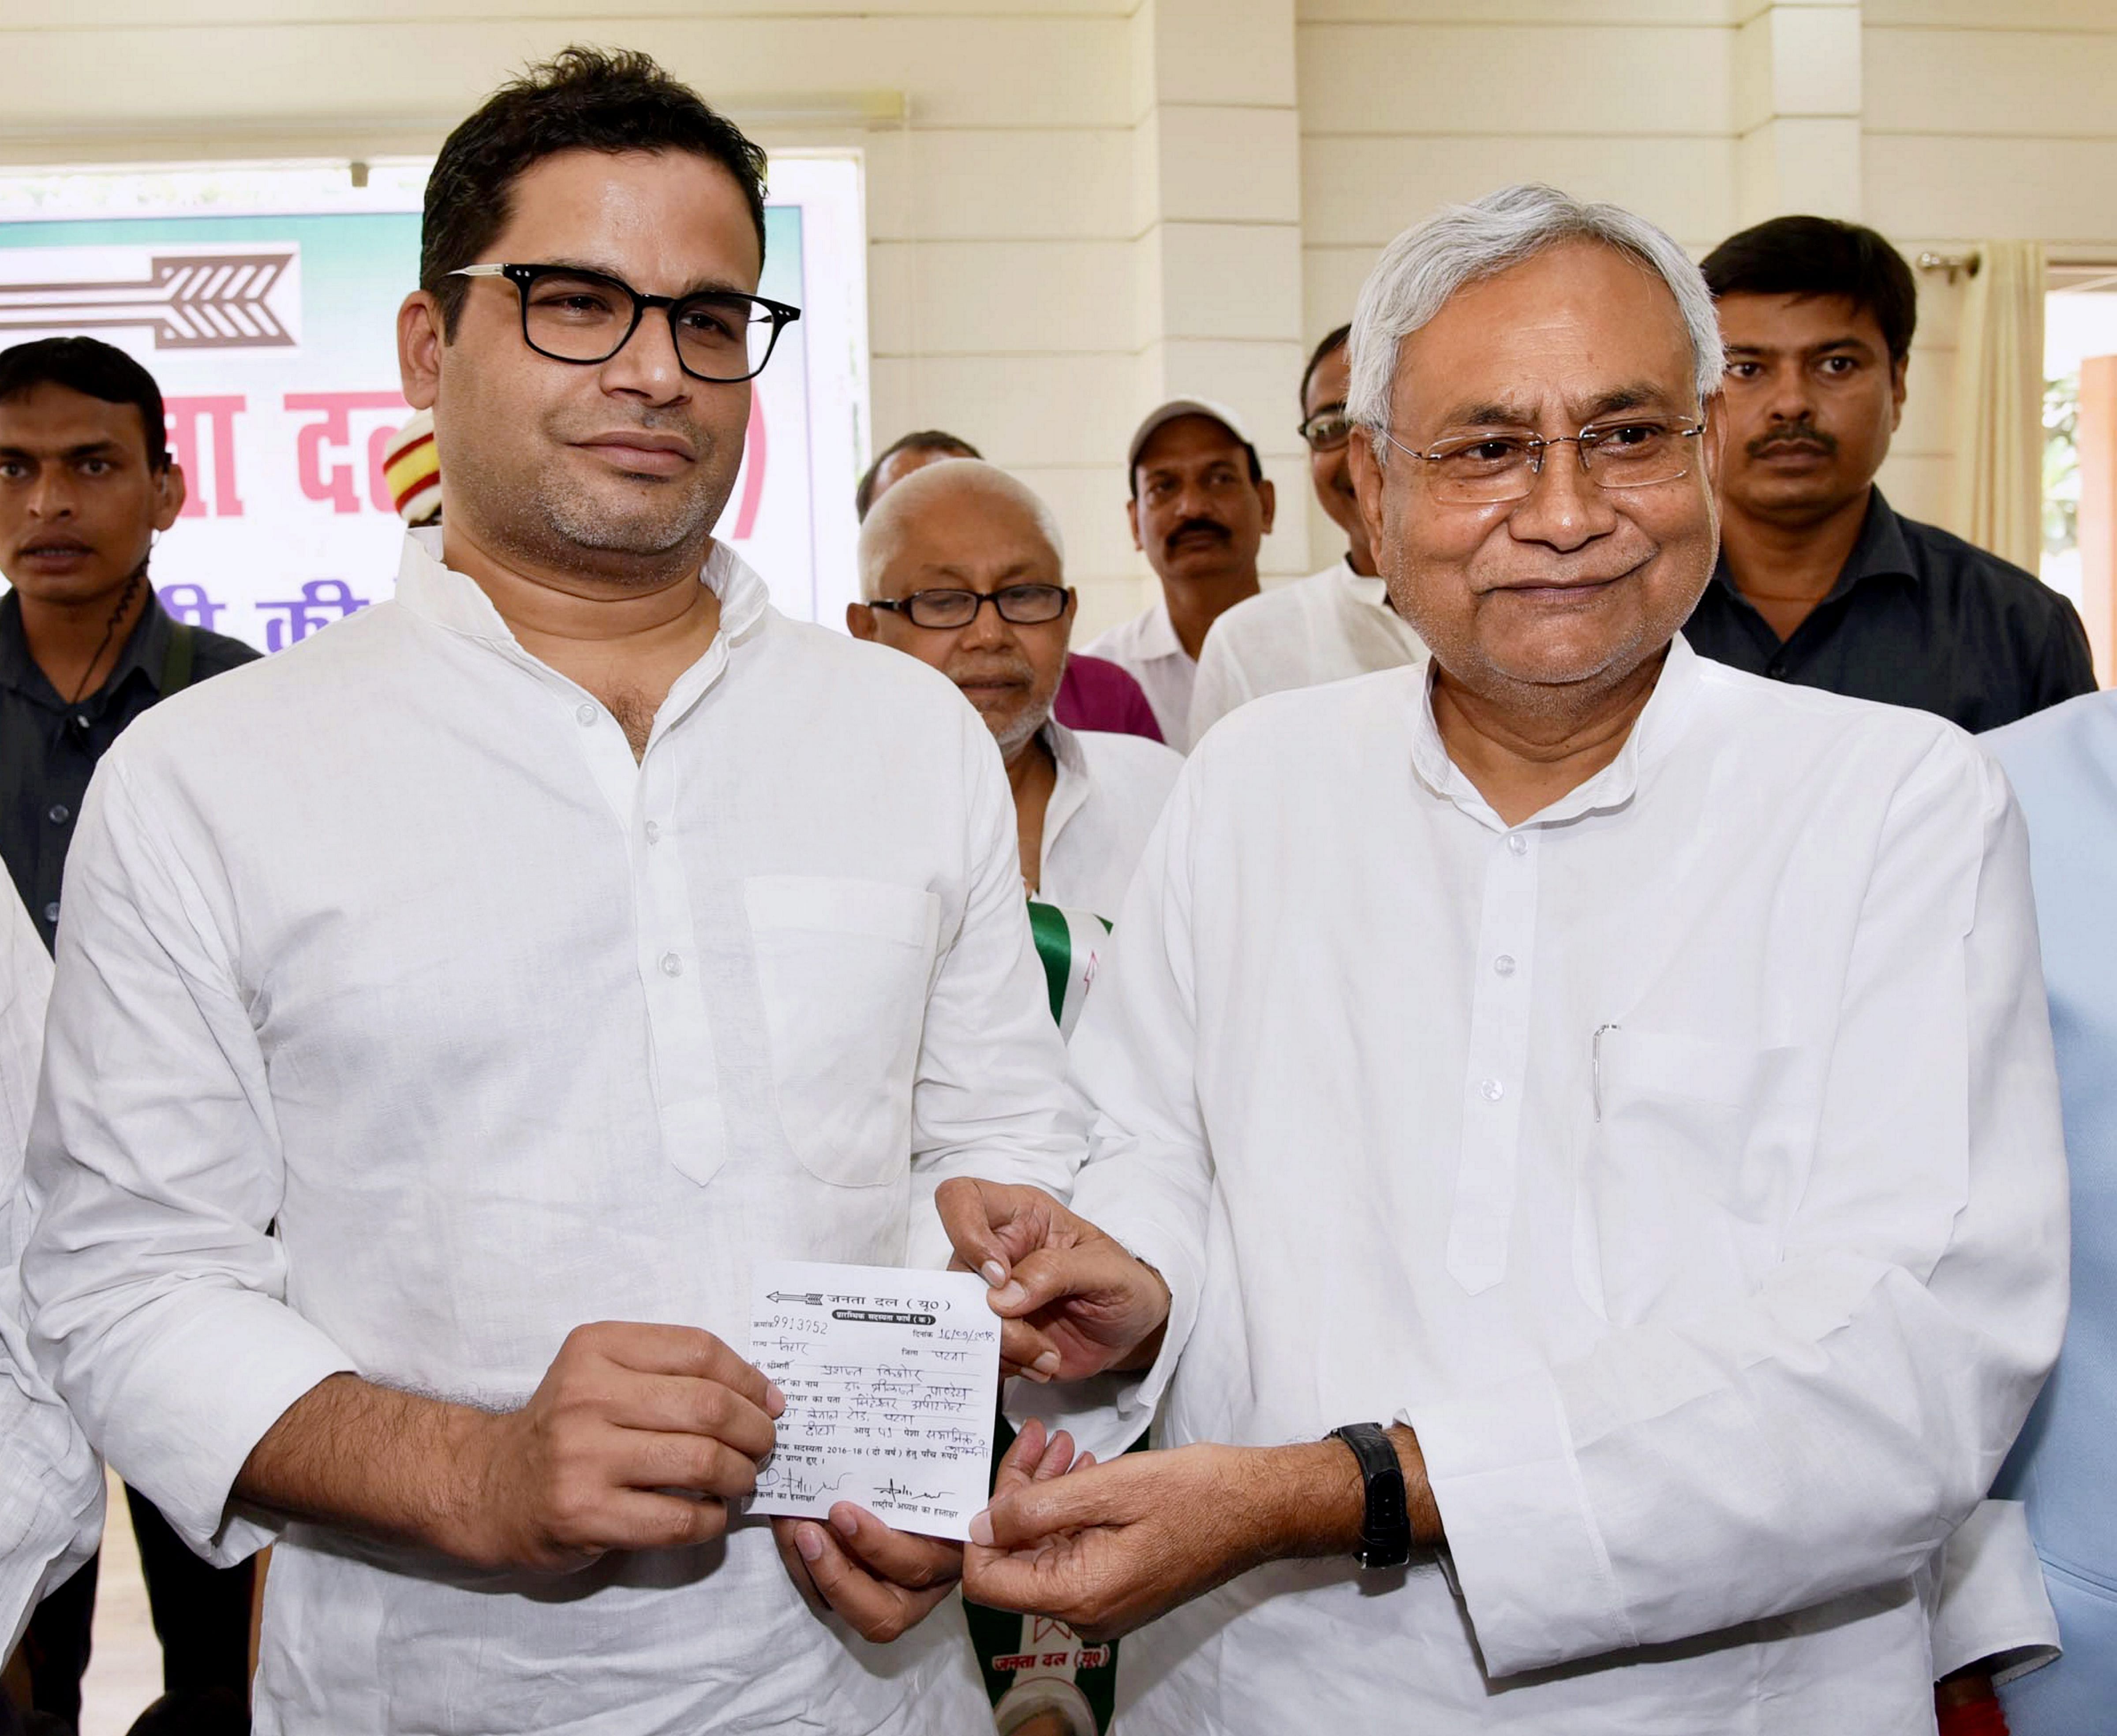 Bihar Chief Minister and Janta Dal United JD(U) National president Nitish Kumar greets electoral strategist Prashant Kishor after he joined JD(U) during party's state executive meeting at Anne Marg, in Patna, on September 16, 2018. PTI file photo